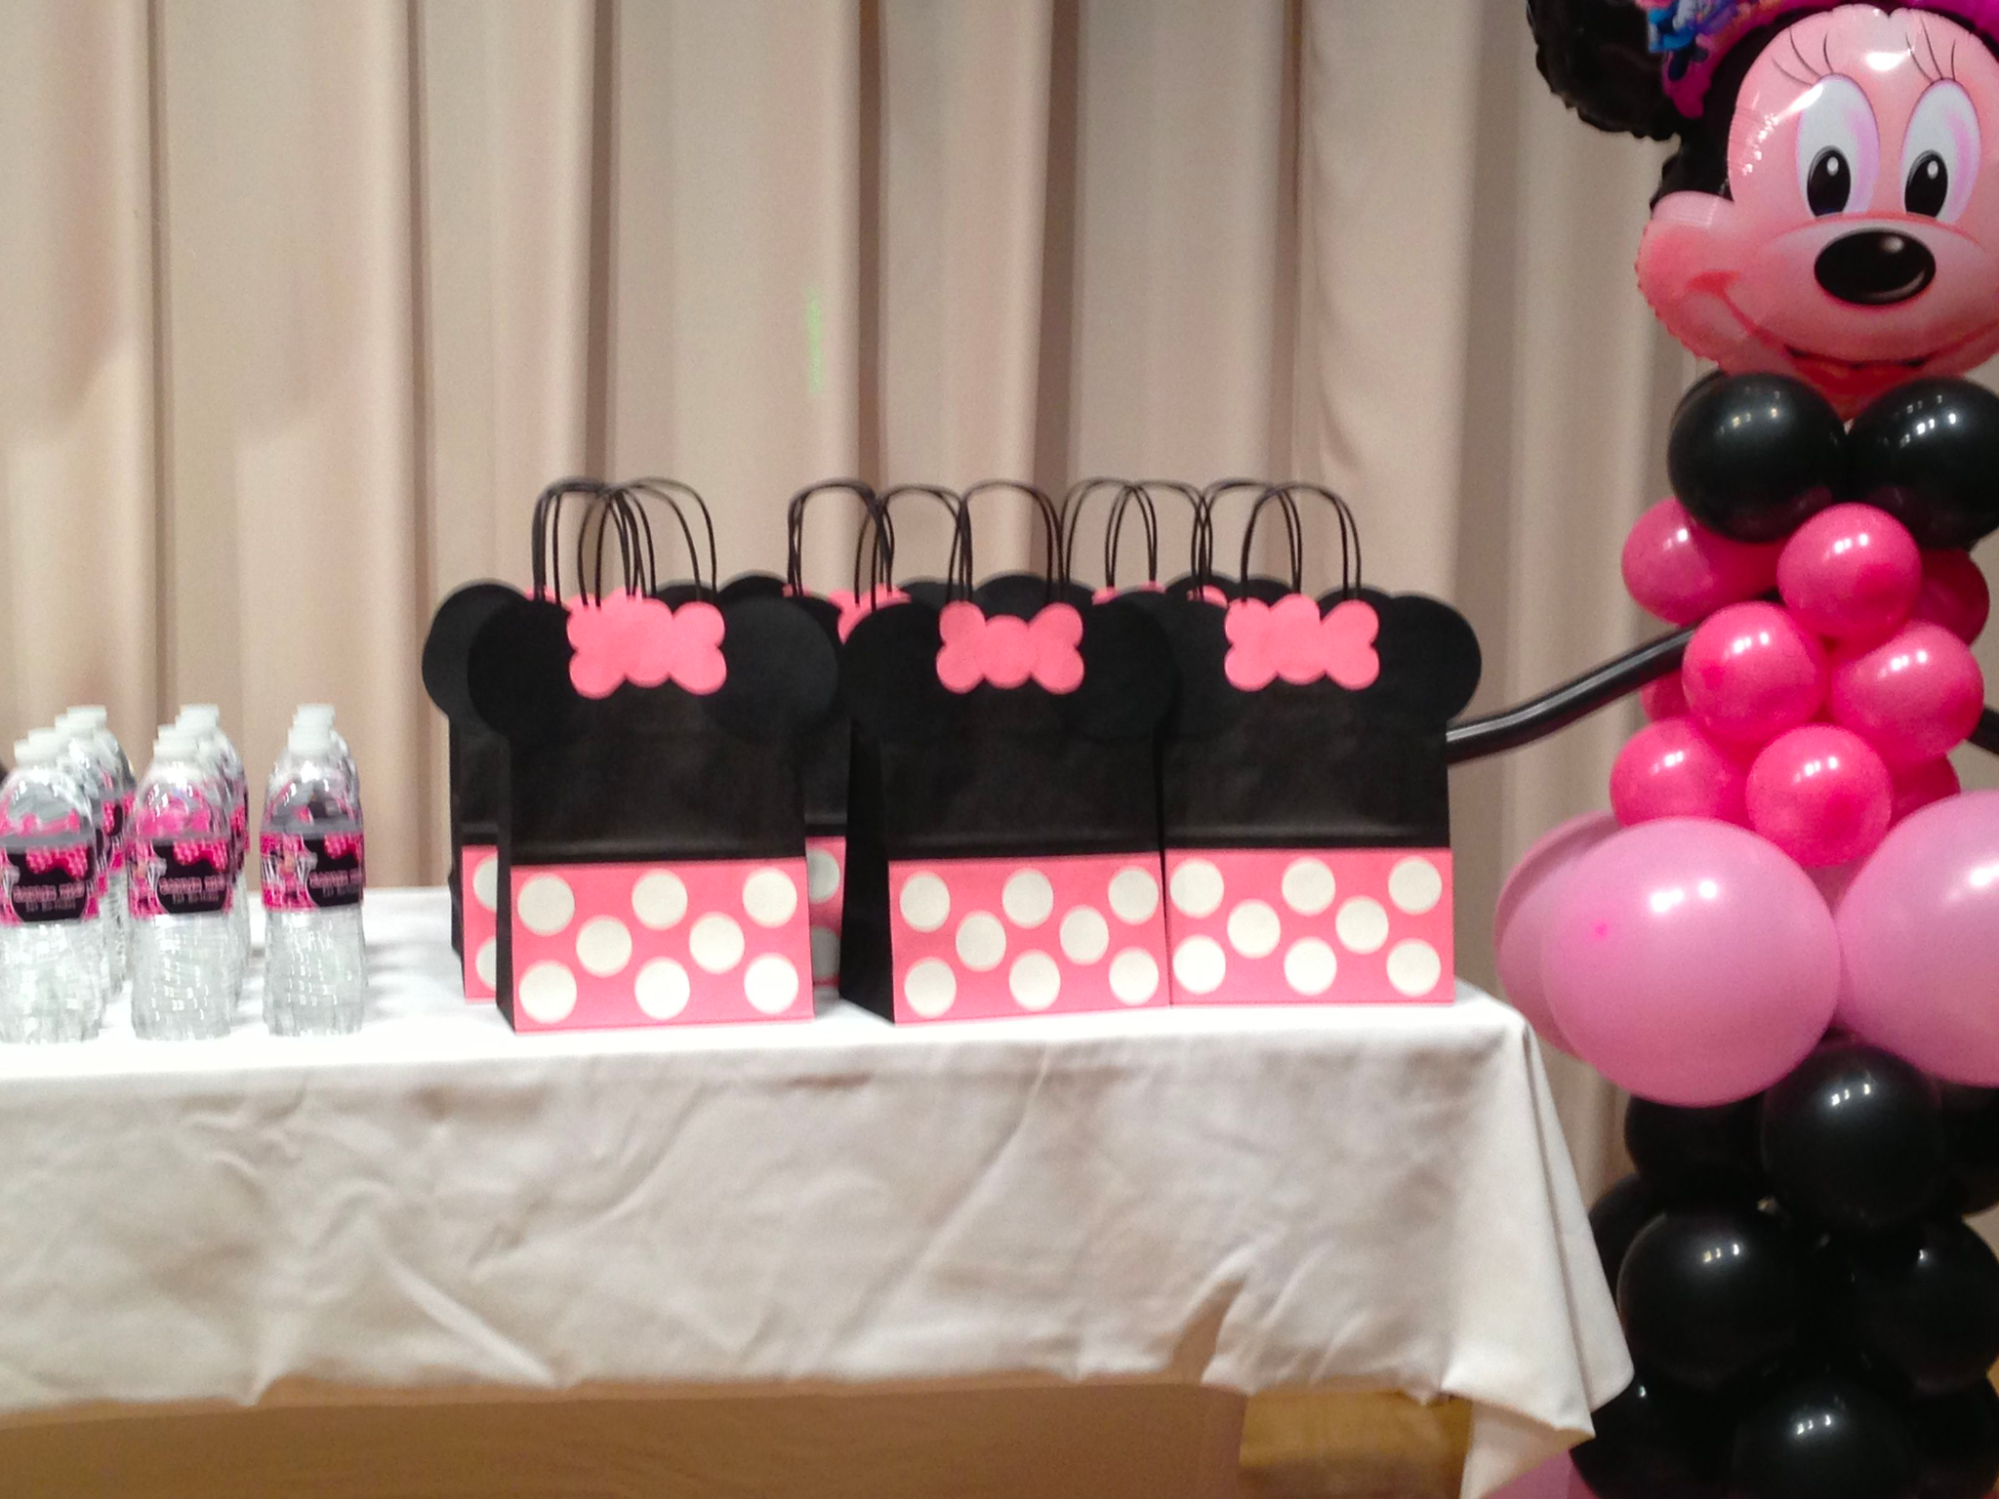 Minnie-mouse-themed birthday party candy bag ideas